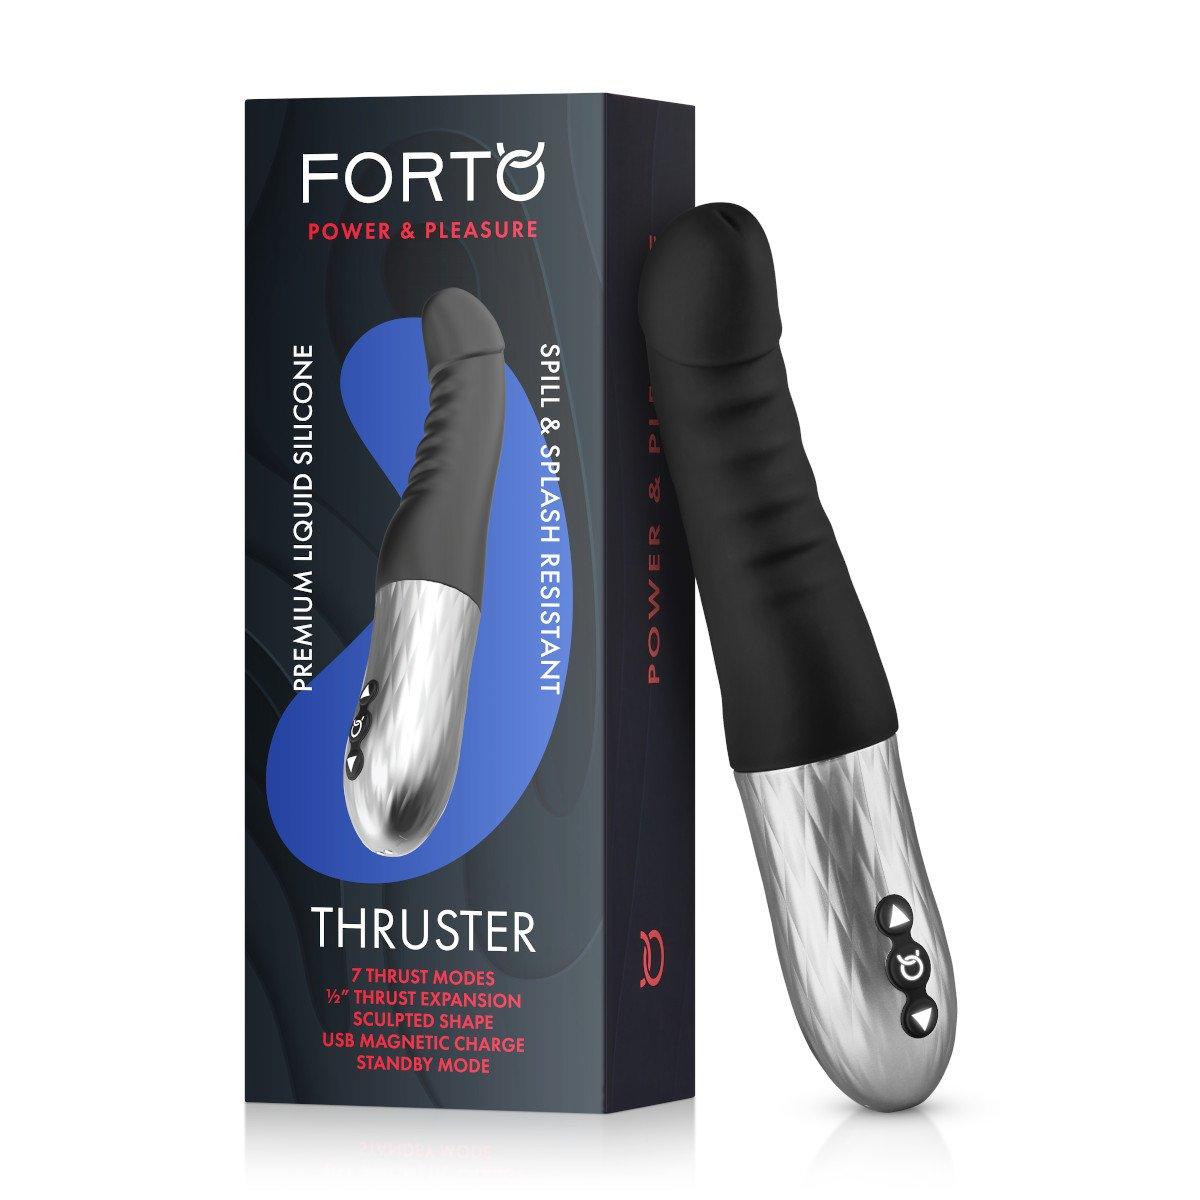 FORTO Thruster - shop enby